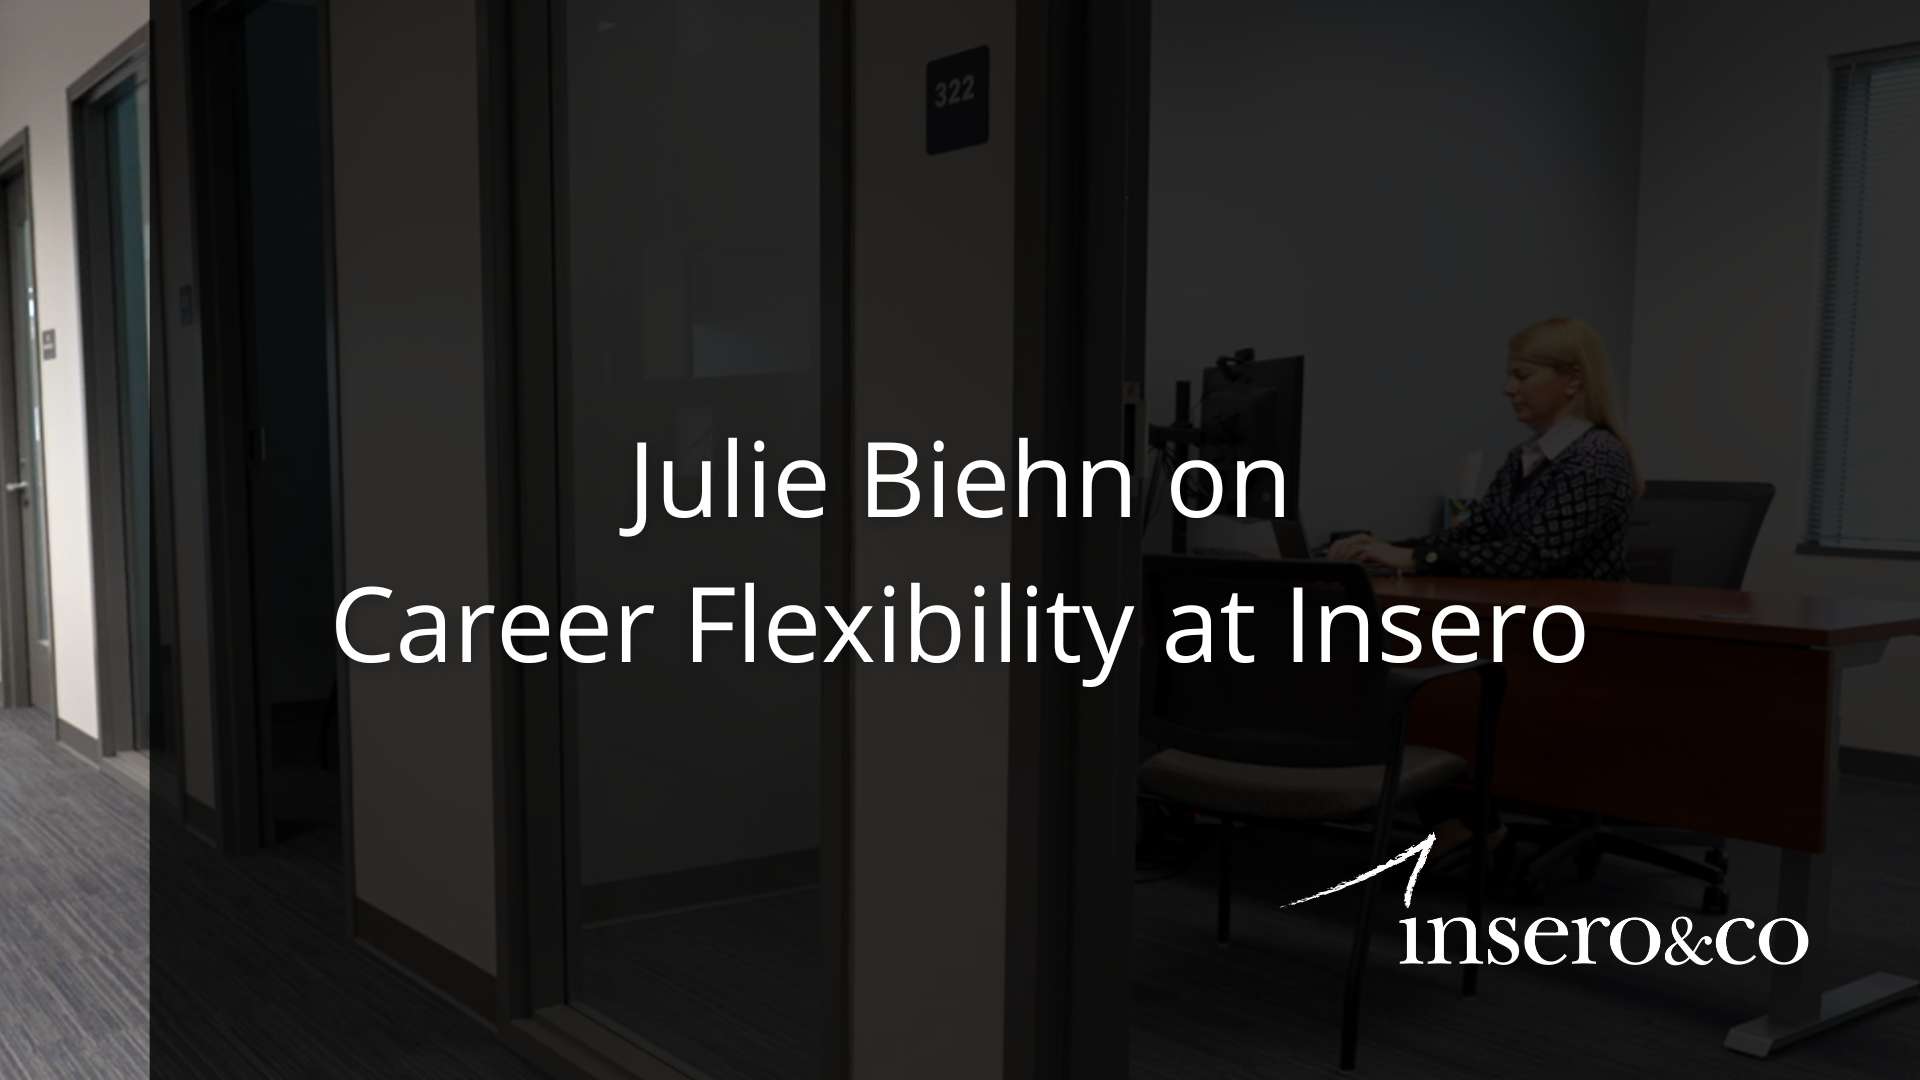 Julie Biehn discusses her experience with flexibility in her career path at Insero to take some time to teach accounting at Ithaca College, and how that experience has benefitted her career overall. #InseroCareers #AccountingCareers #LifeAtInsero #Teaching